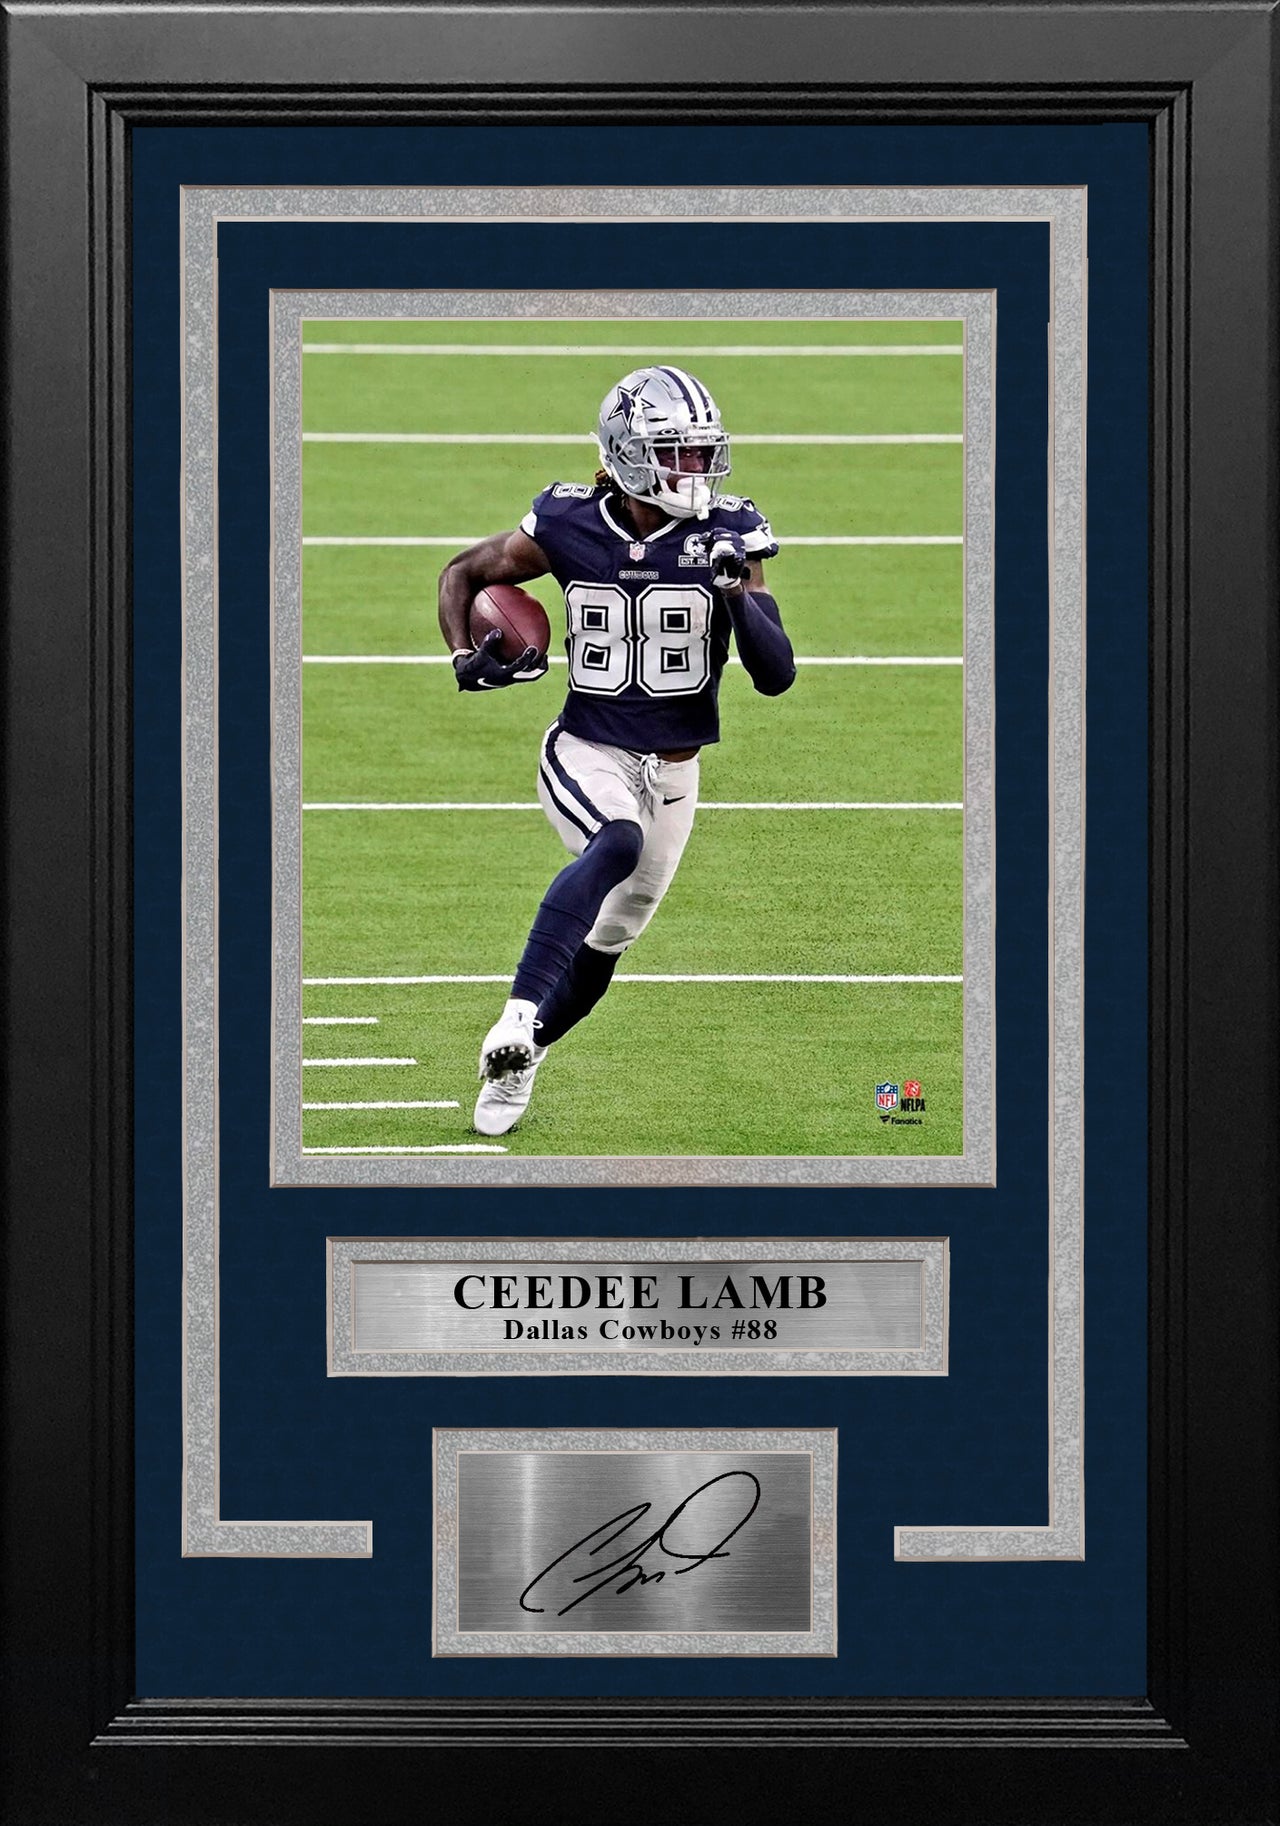 CeeDee Lamb in Action Dallas Cowboys 8" x 10" Framed Football Photo with Engraved Autograph - Dynasty Sports & Framing 